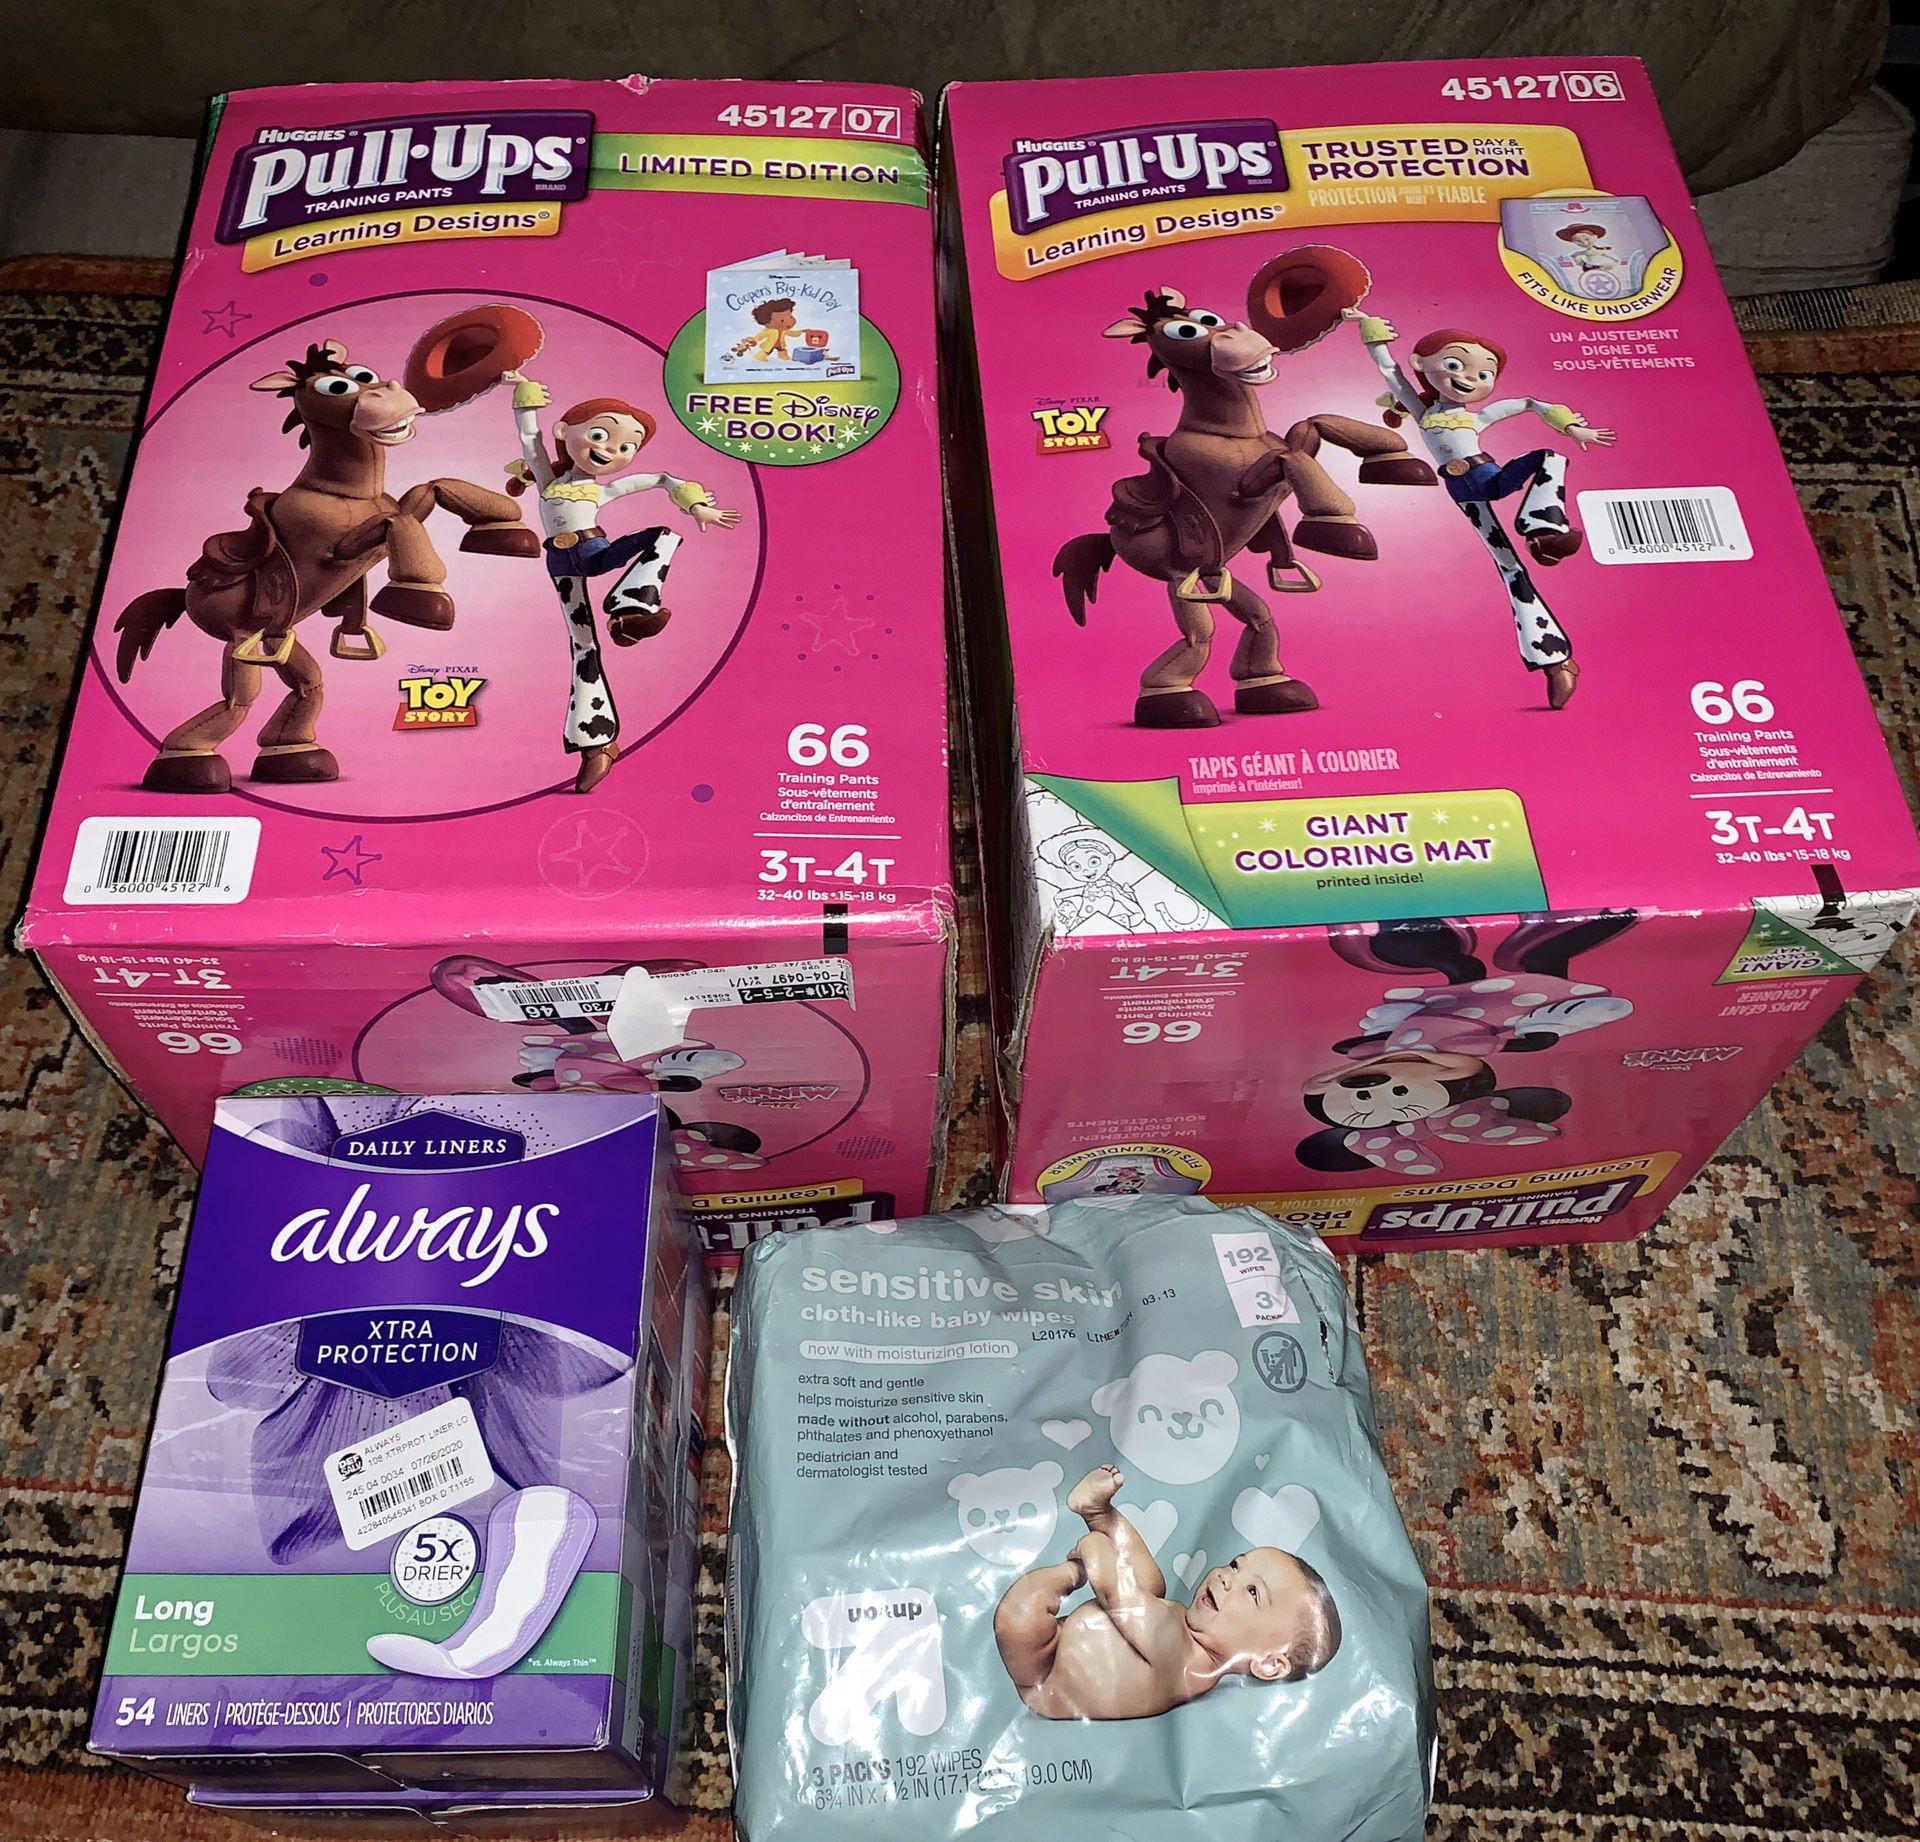 Pull ups Huggies size 3 to 466 count plus brand new miscellaneous toys